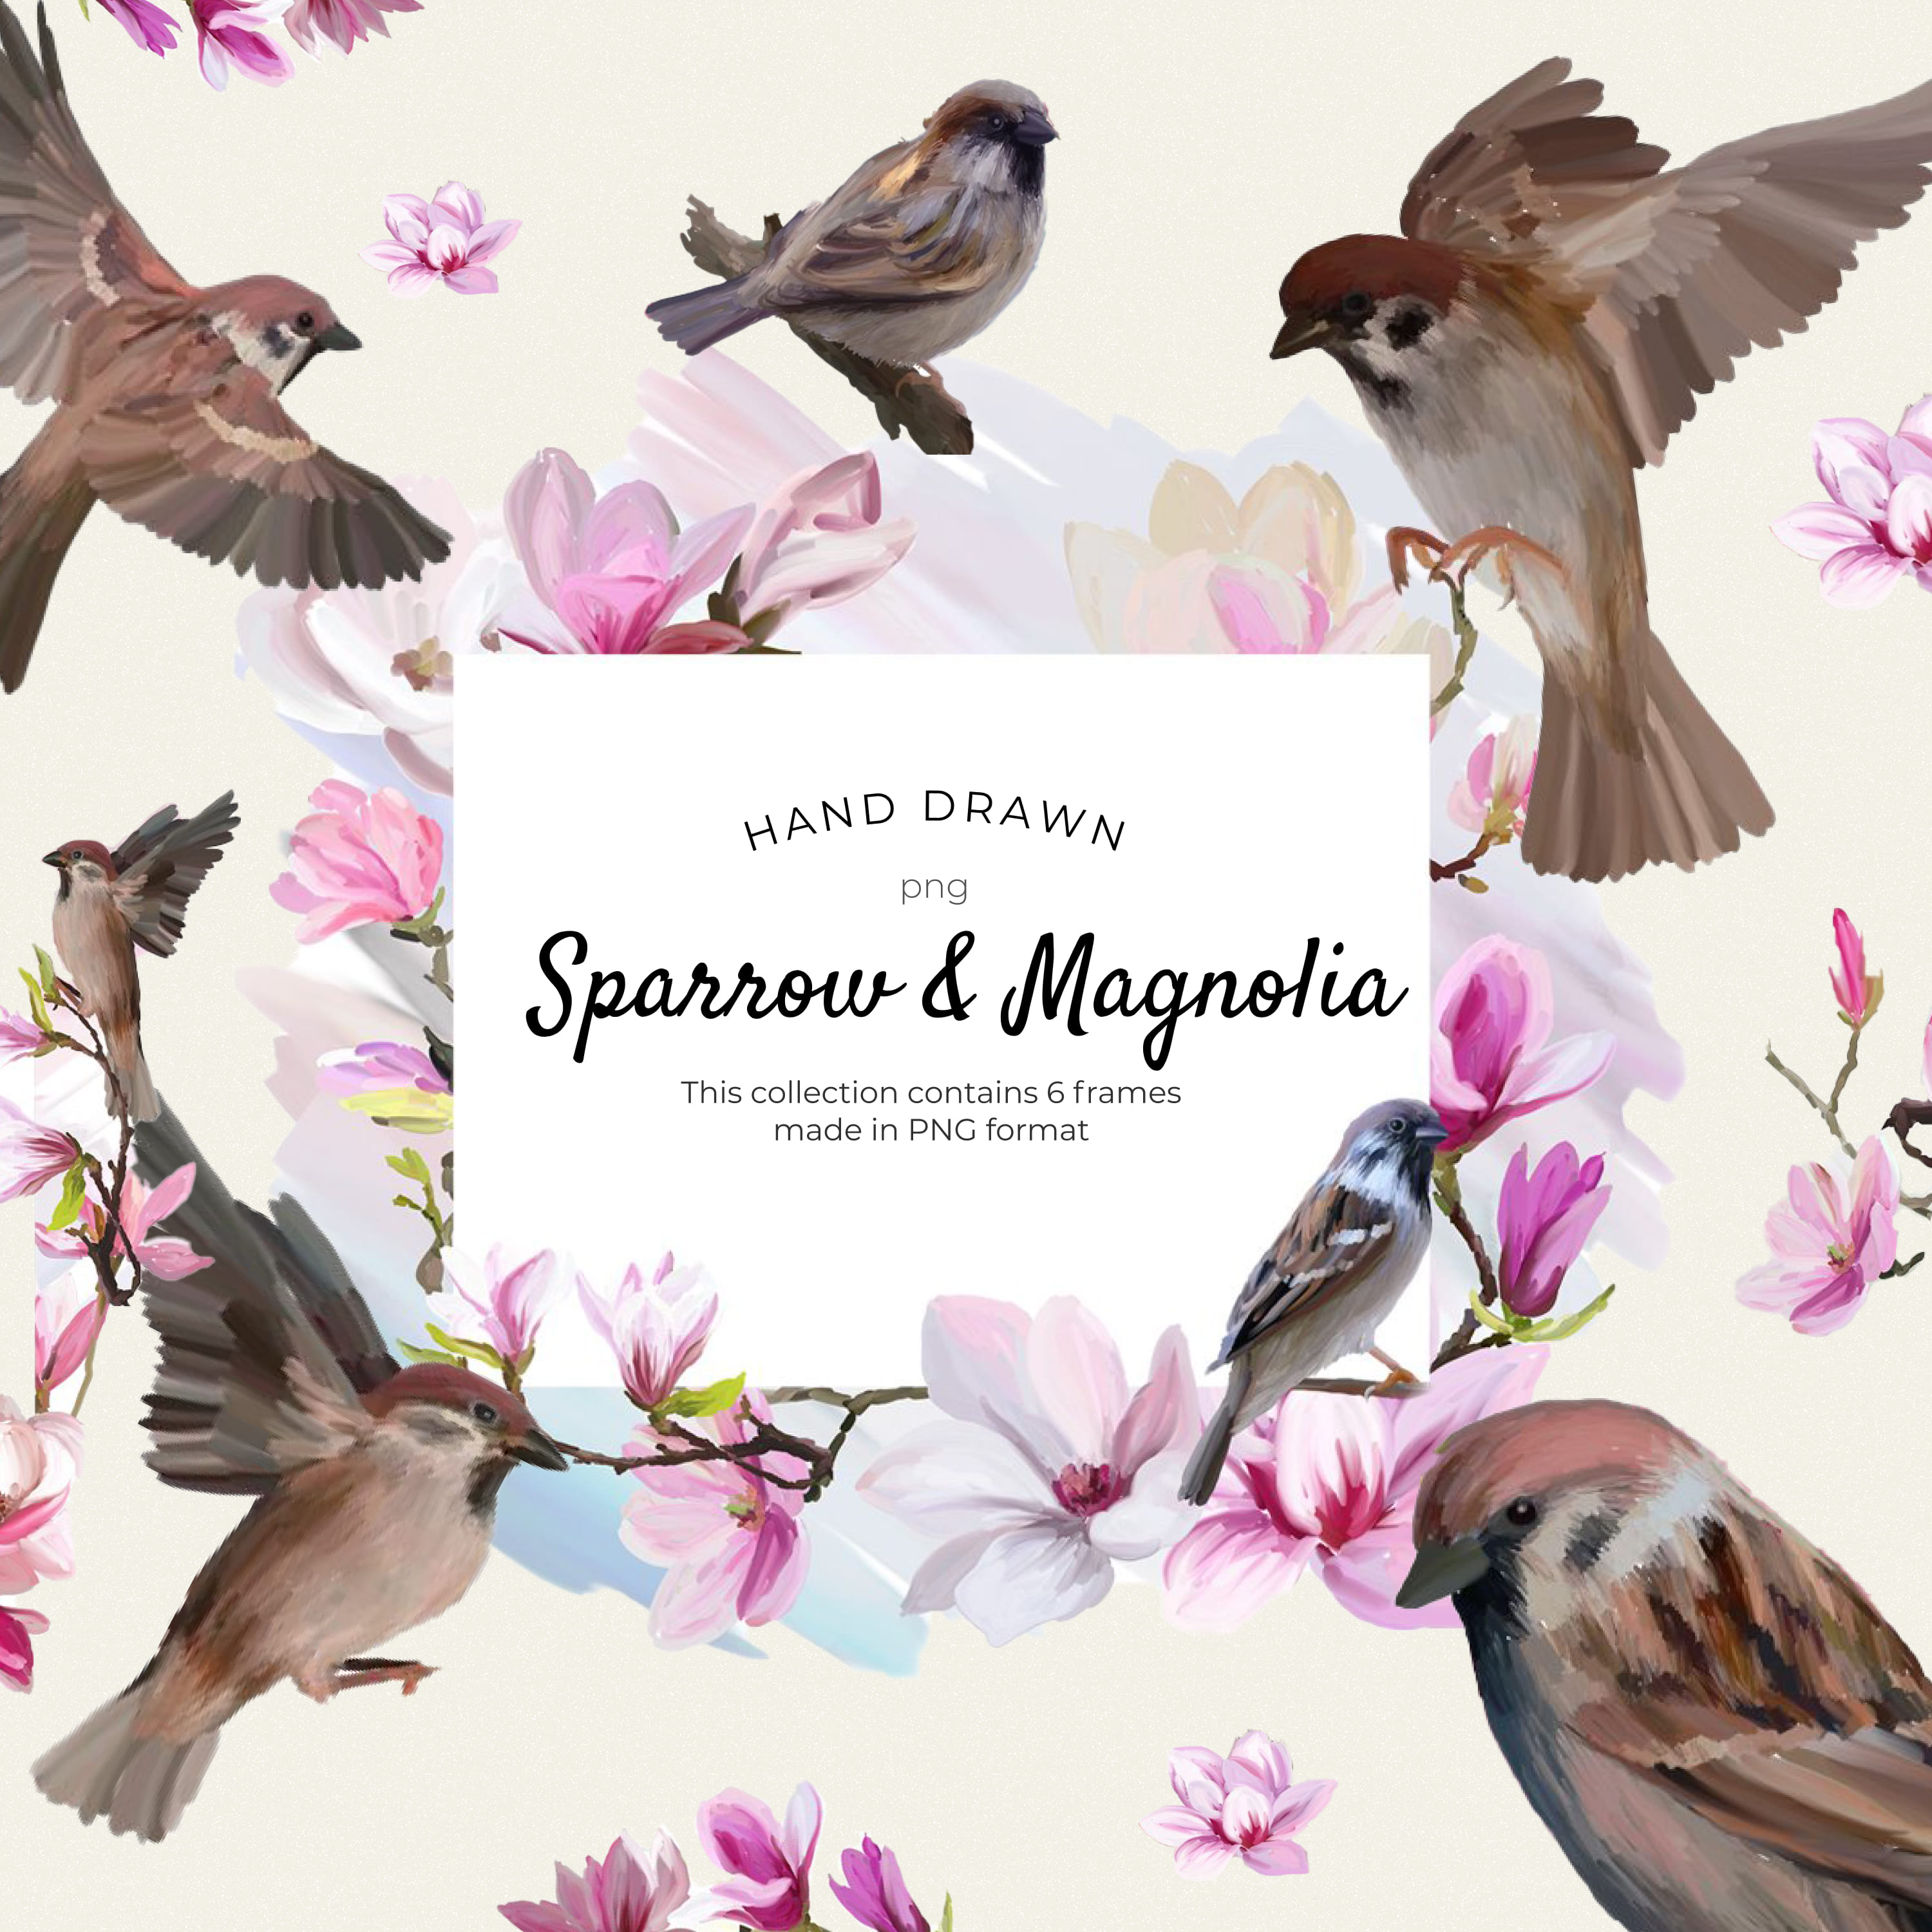 Sparrow and magnolia hand drawn floral frames - main image preview.